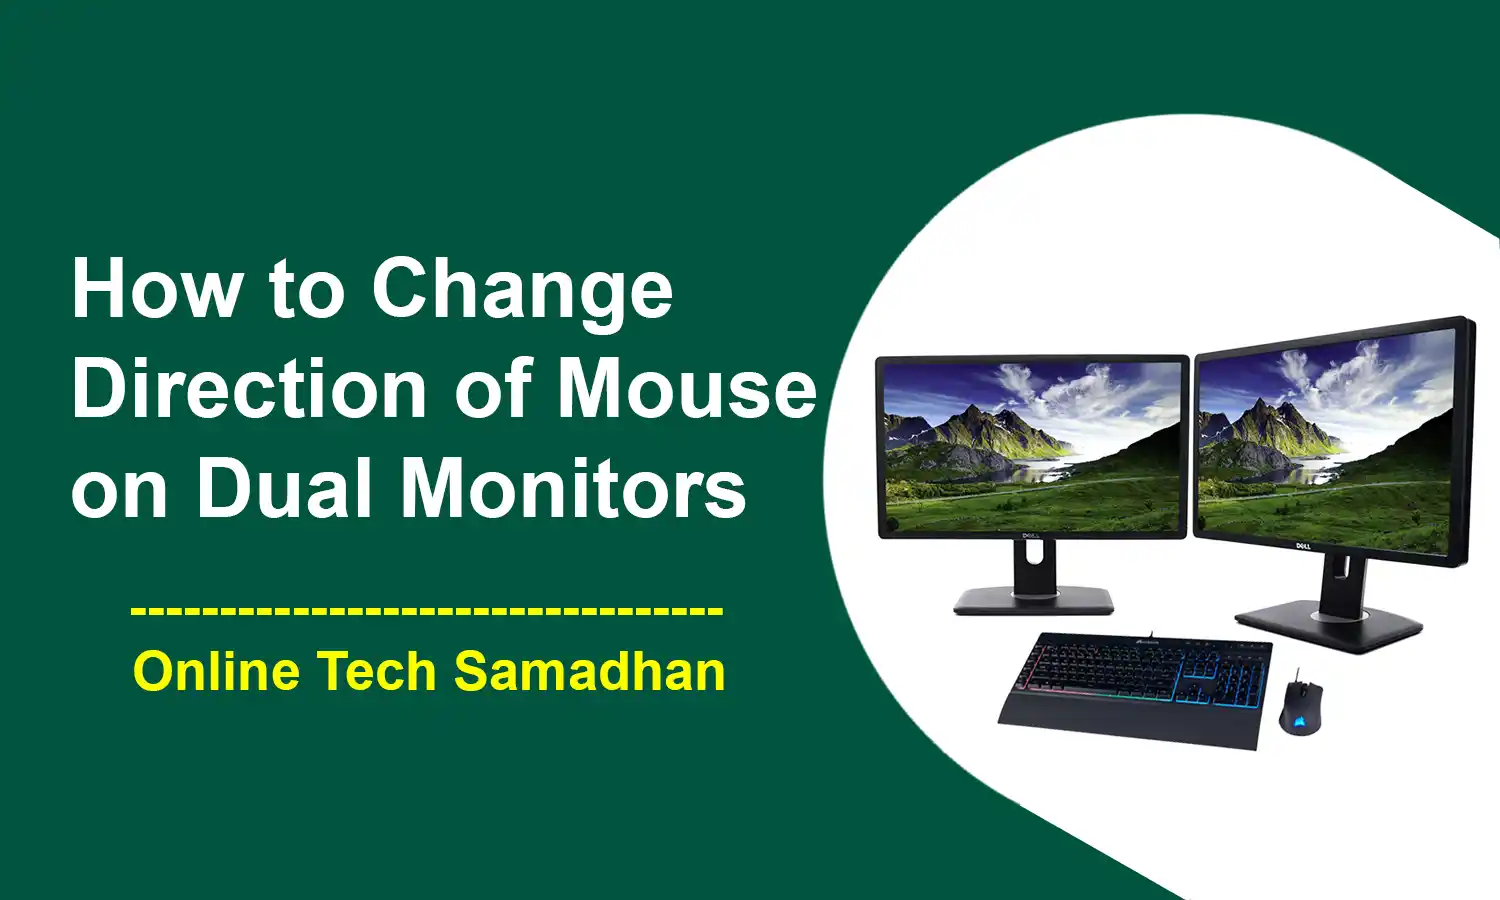 How to Change Direction of Mouse on Dual Monitors